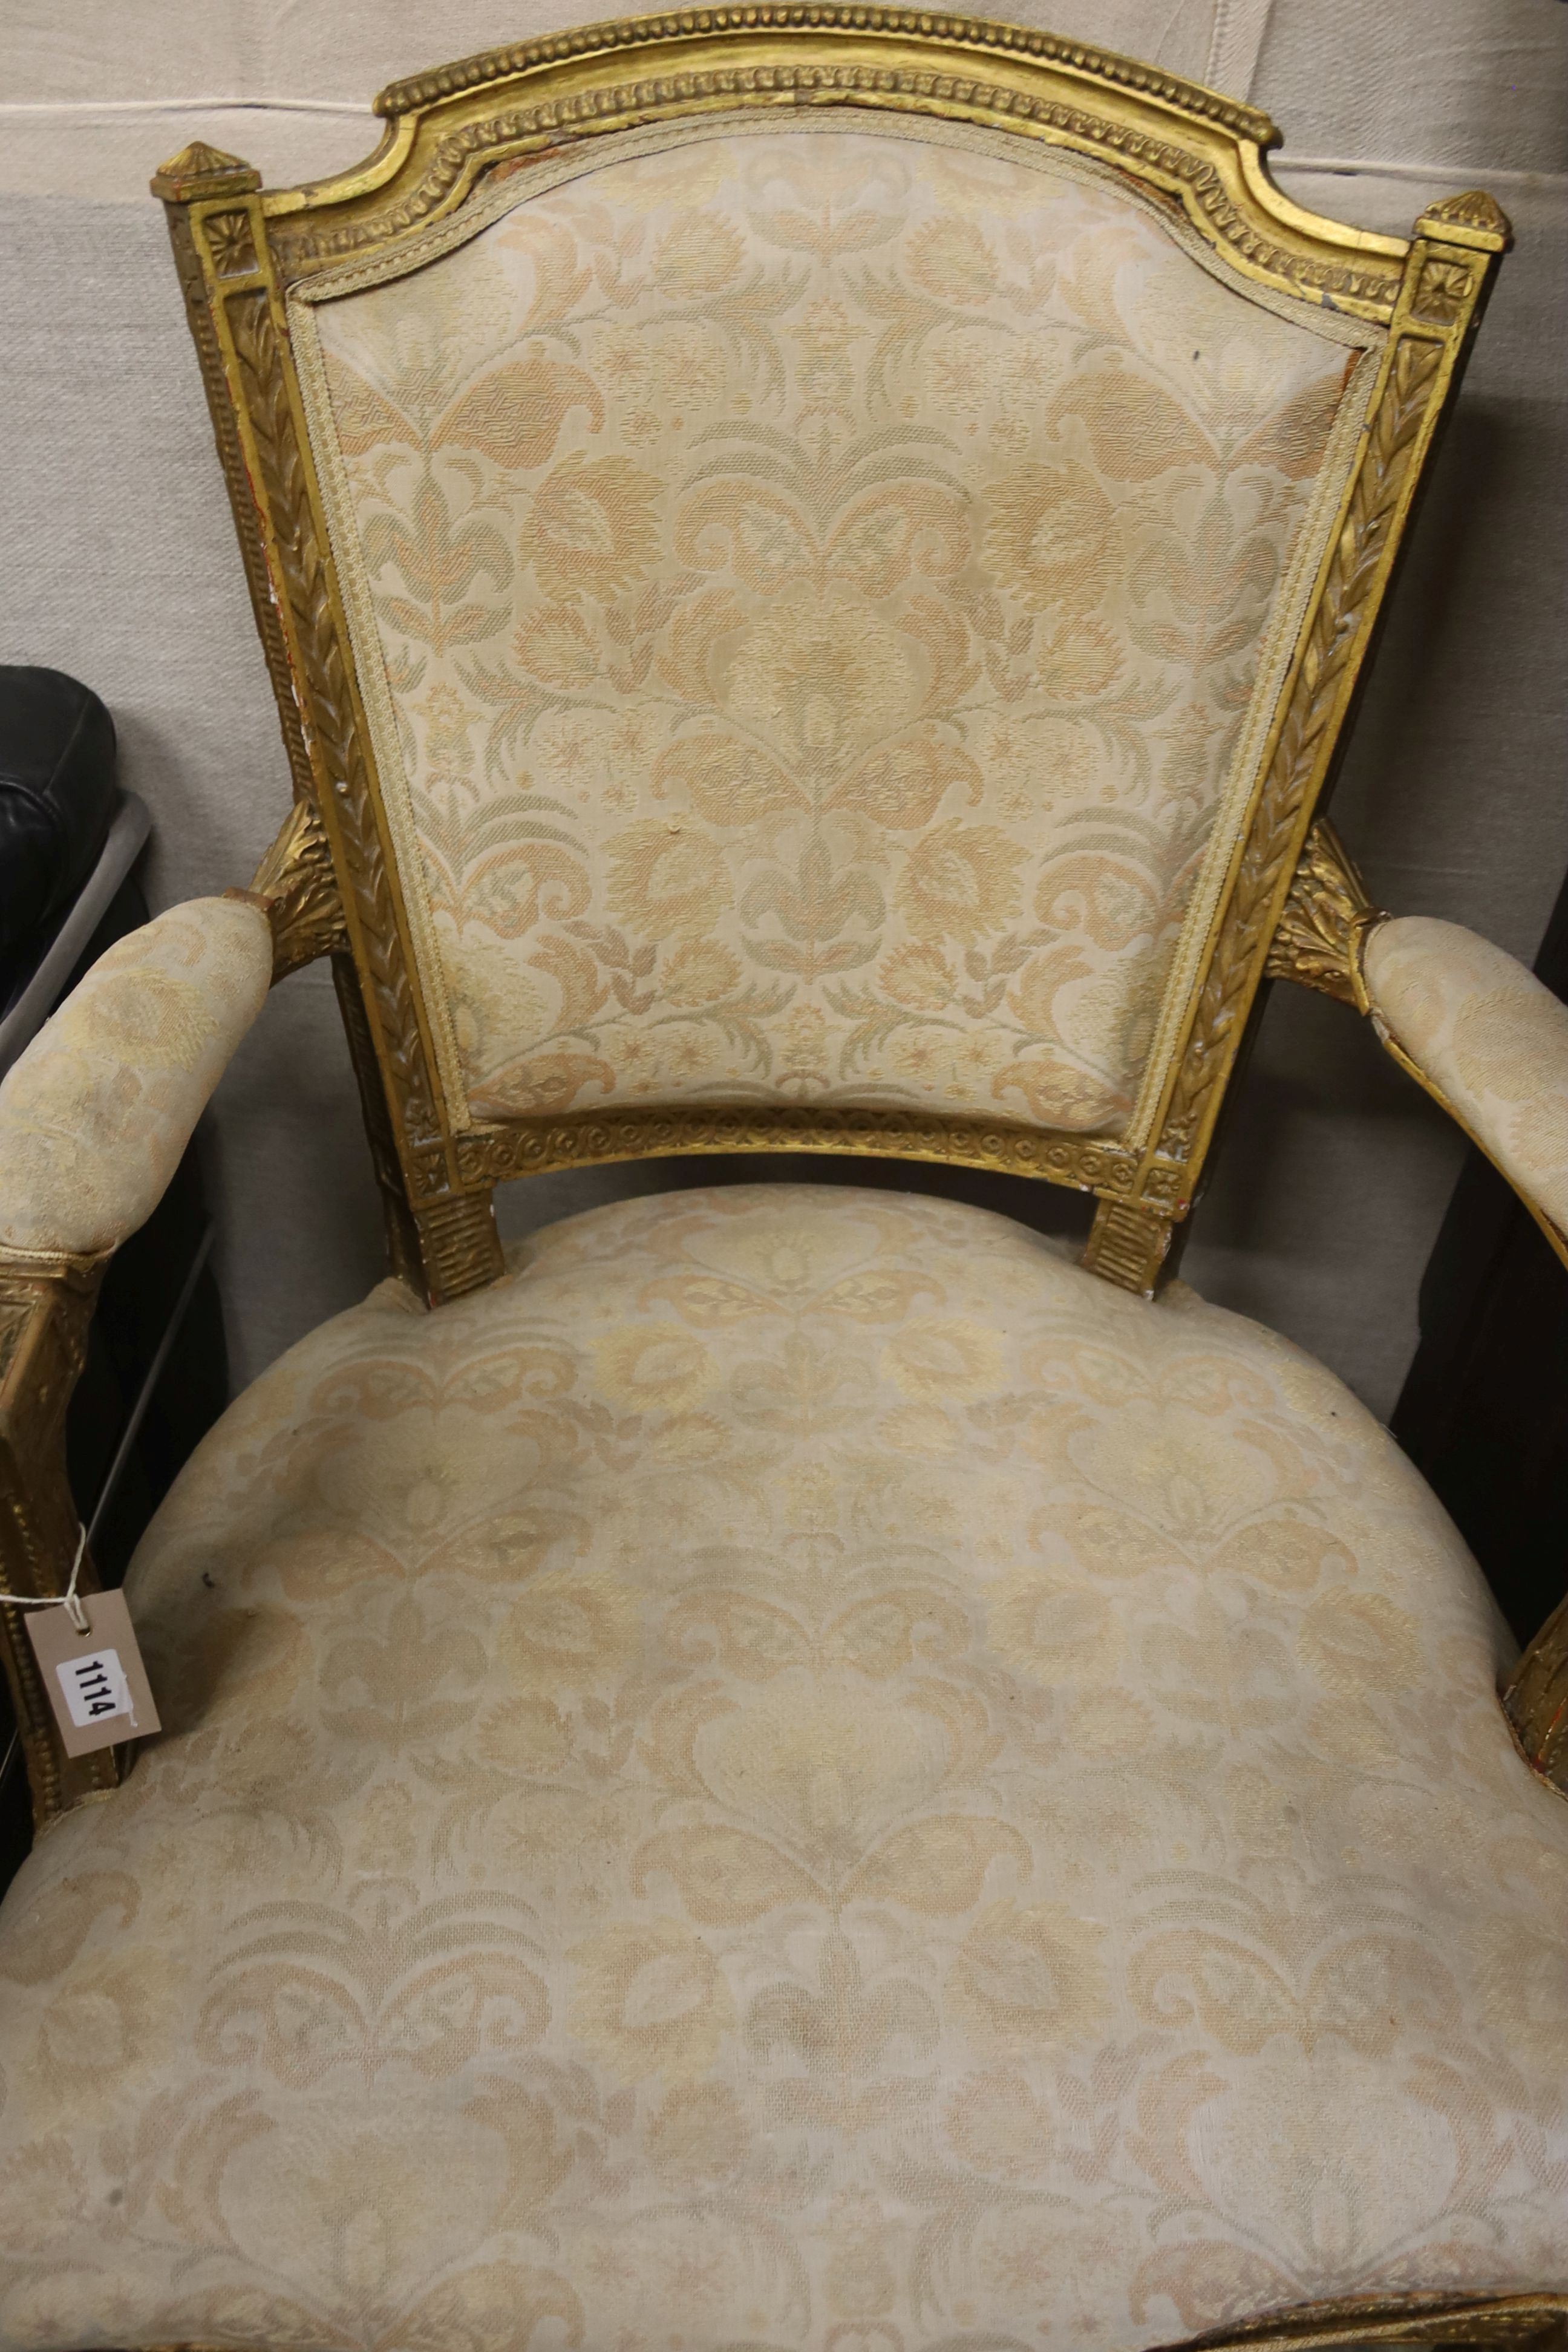 A 19th century French giltwood fauteuil, width 65cm, depth 60cm, height 94cm